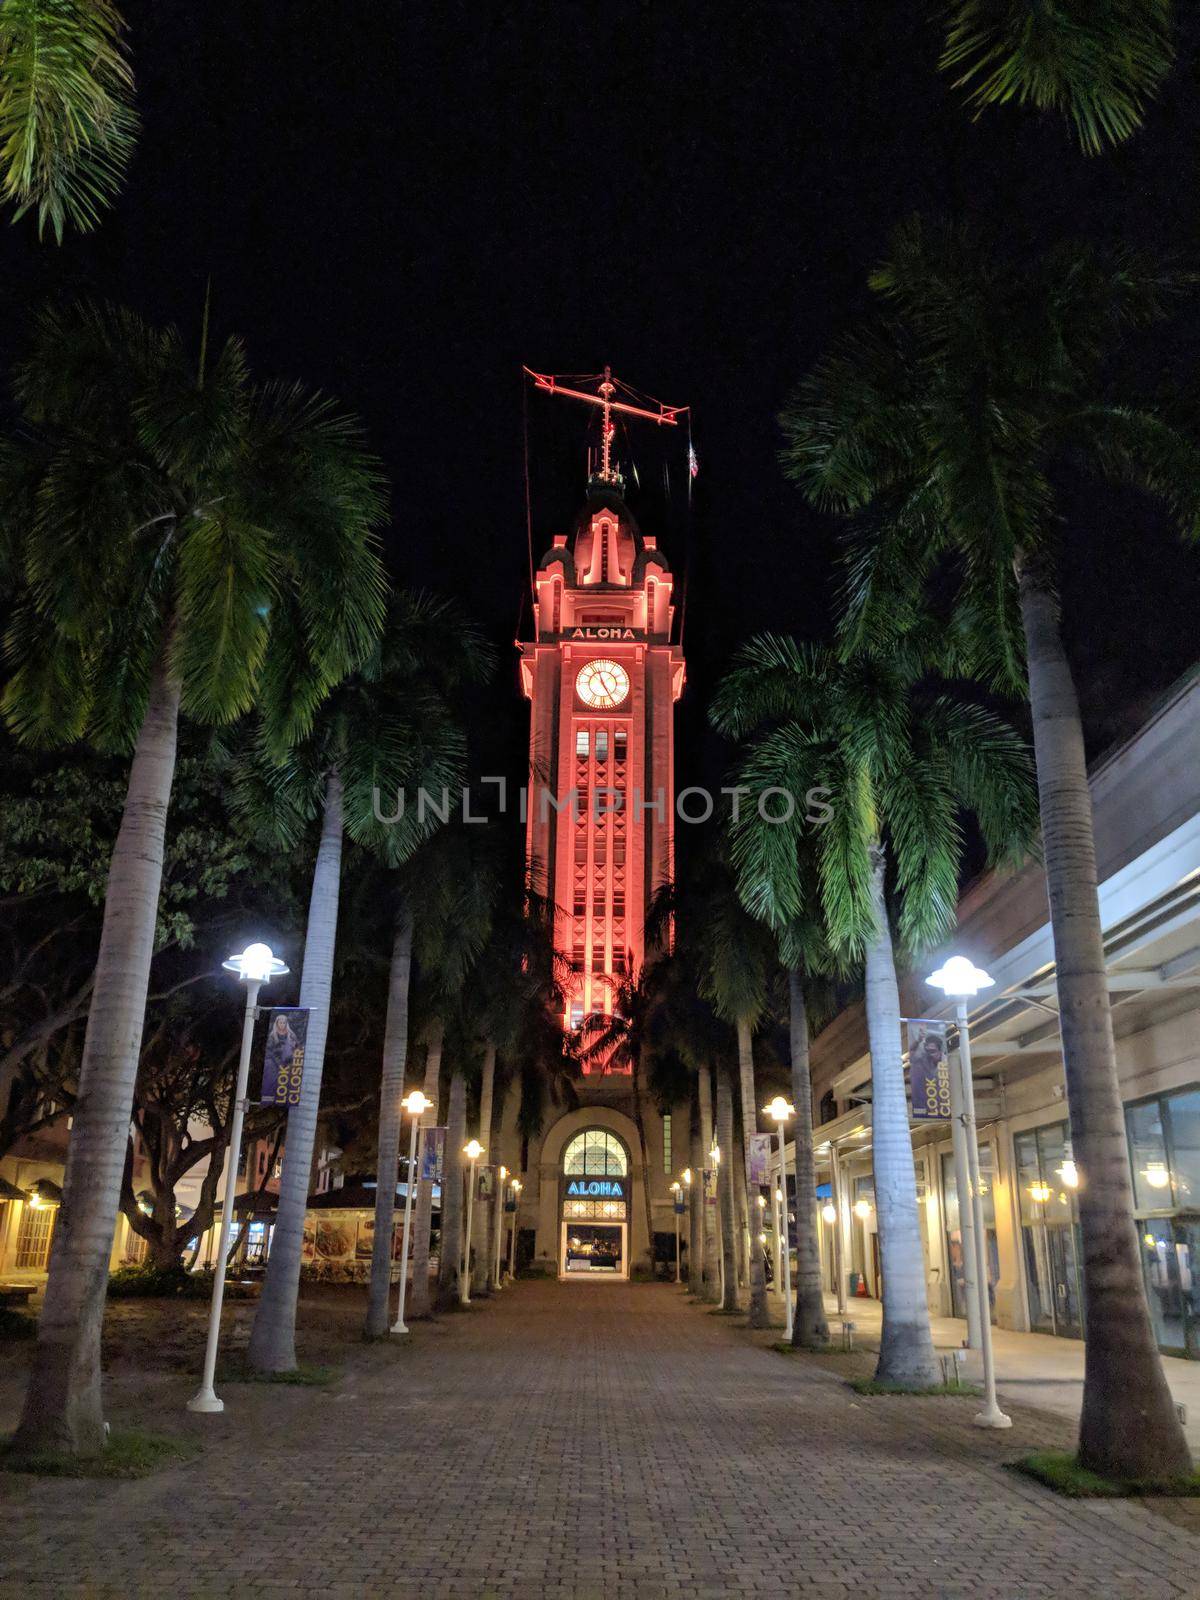 Honolulu - April 18, 2018: Pathway to Aloha Tower at Night which is light up in red and has greeted arriving visitors for a century to Honolulu Harbor on Oahu, Hawaii.  Aloha Tower was the tallest building on the island at the time of its construction.